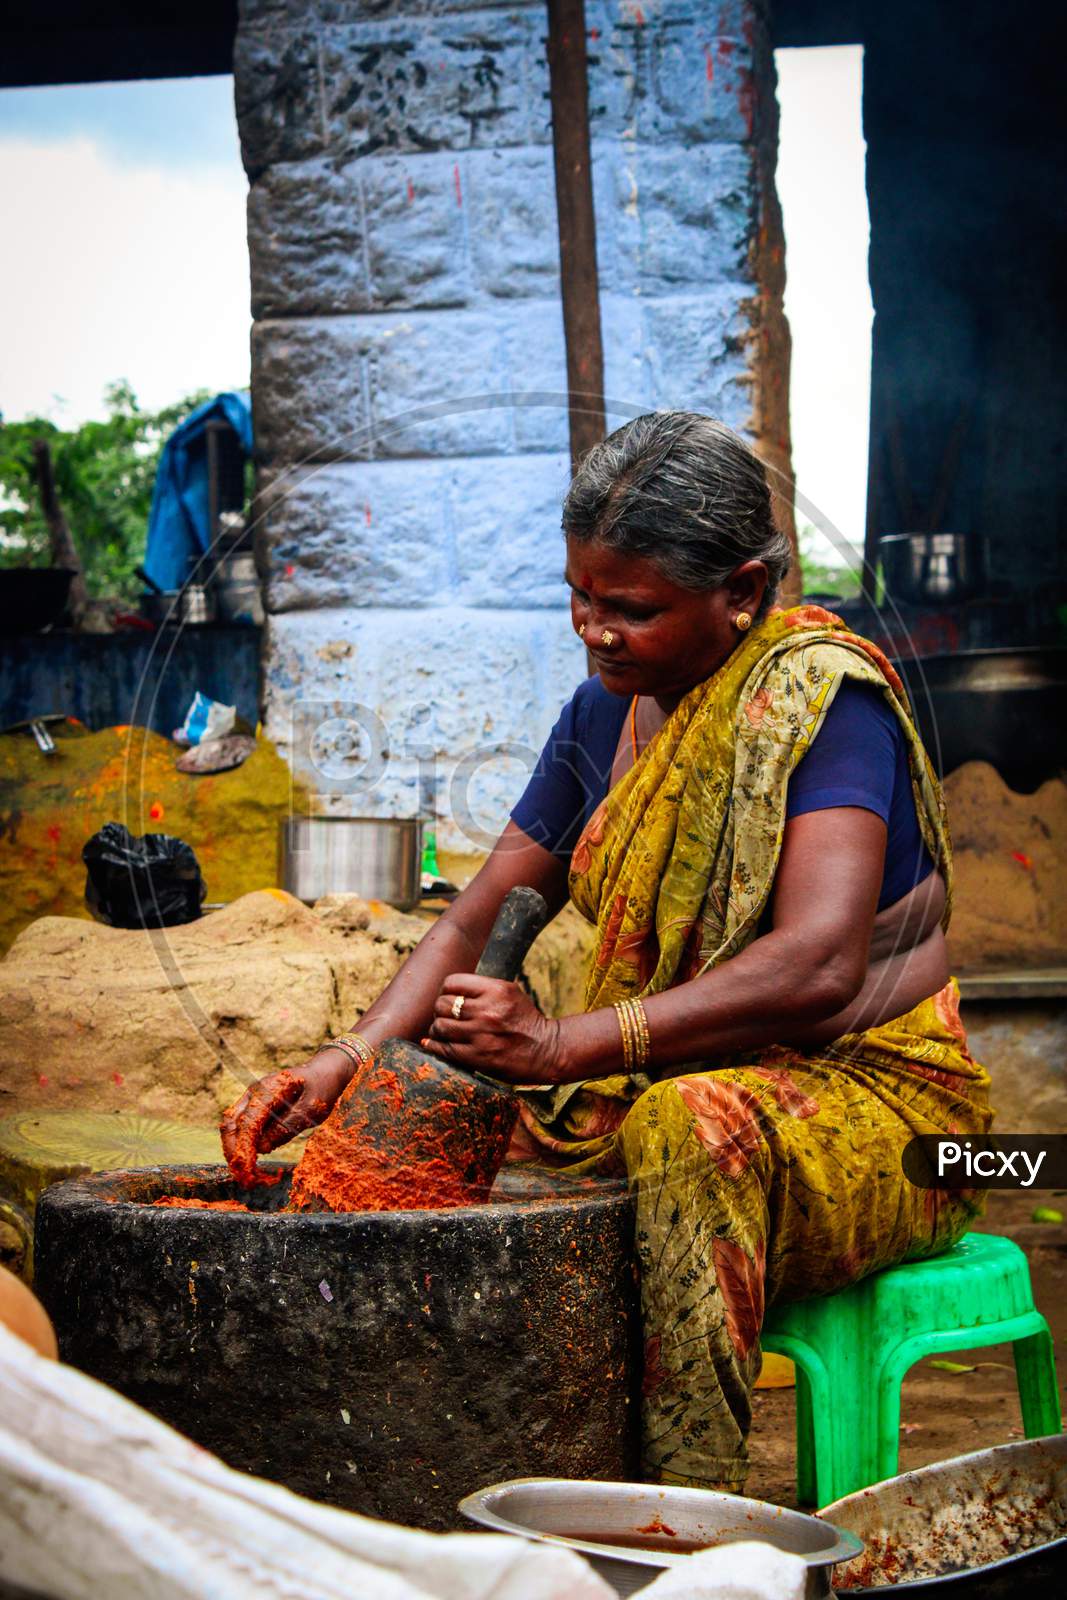 Indian Women powdering spices in big stone bowl